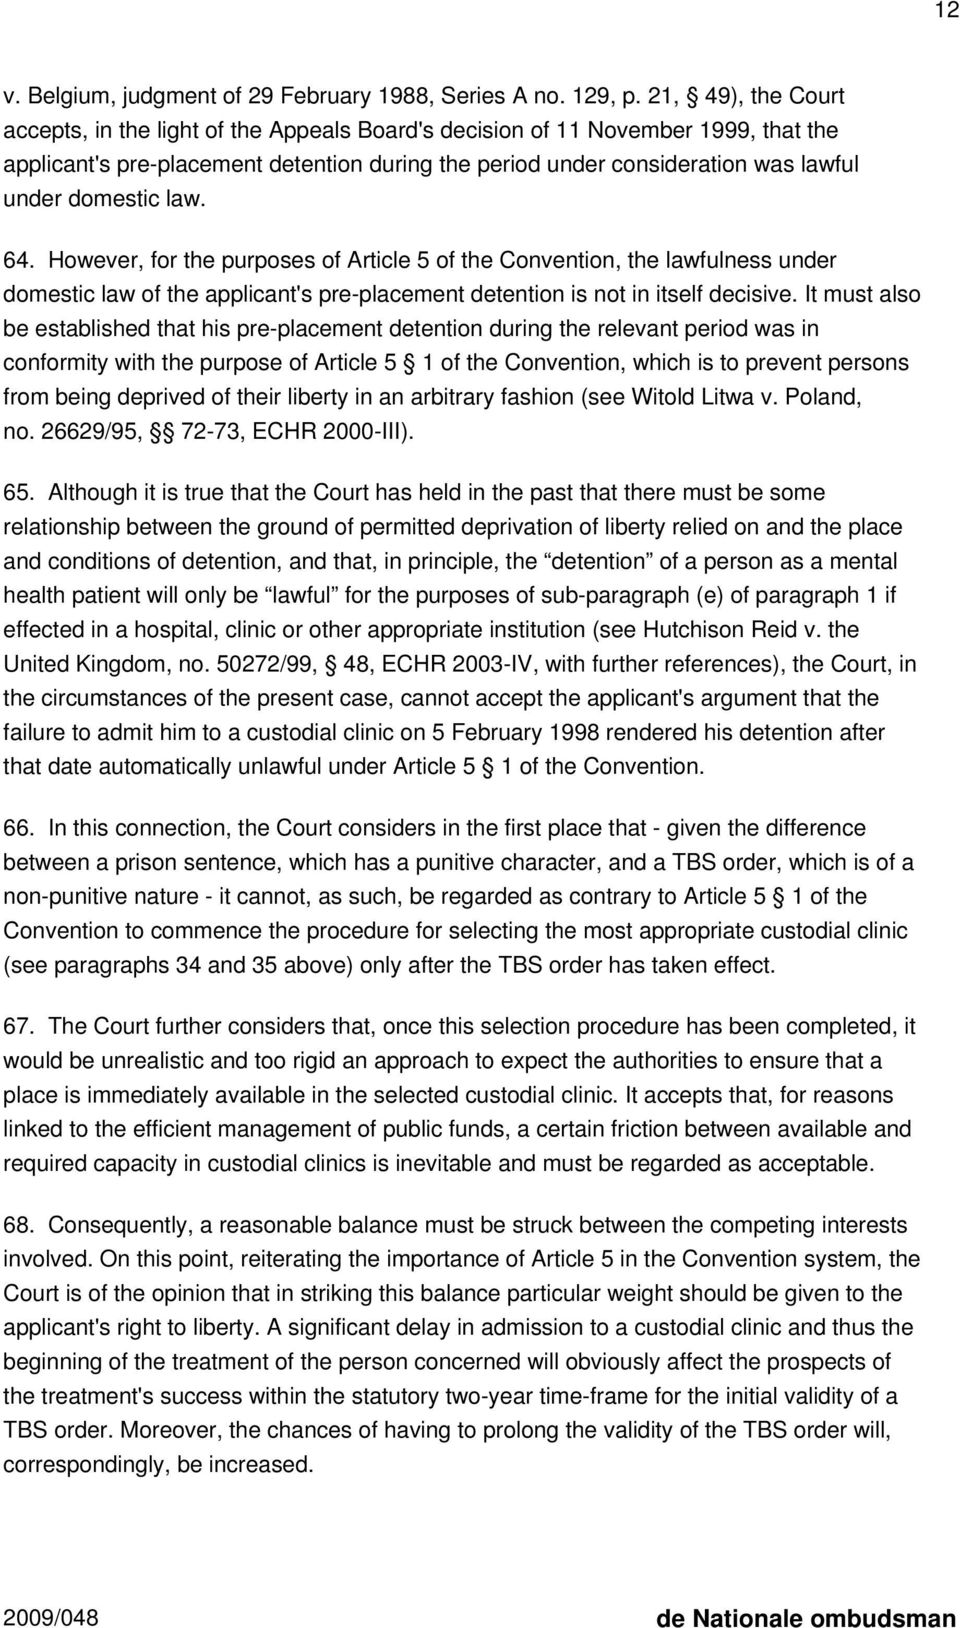 domestic law. 64. However, for the purposes of Article 5 of the Convention, the lawfulness under domestic law of the applicant's pre-placement detention is not in itself decisive.